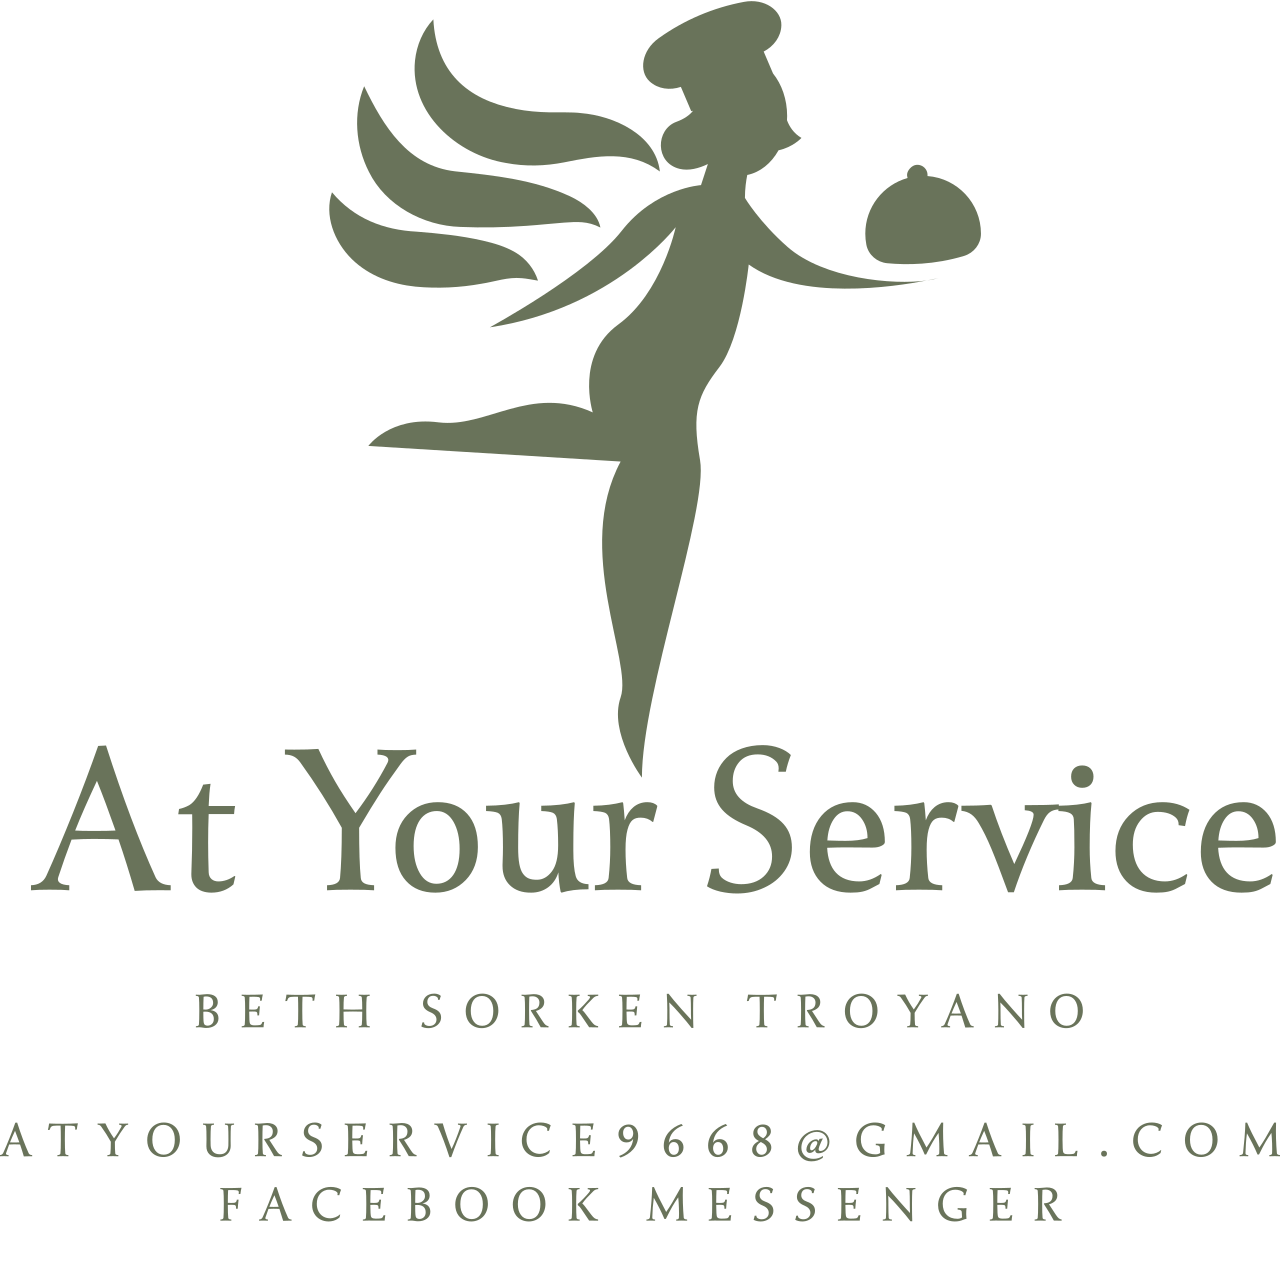 At Your Service's web page